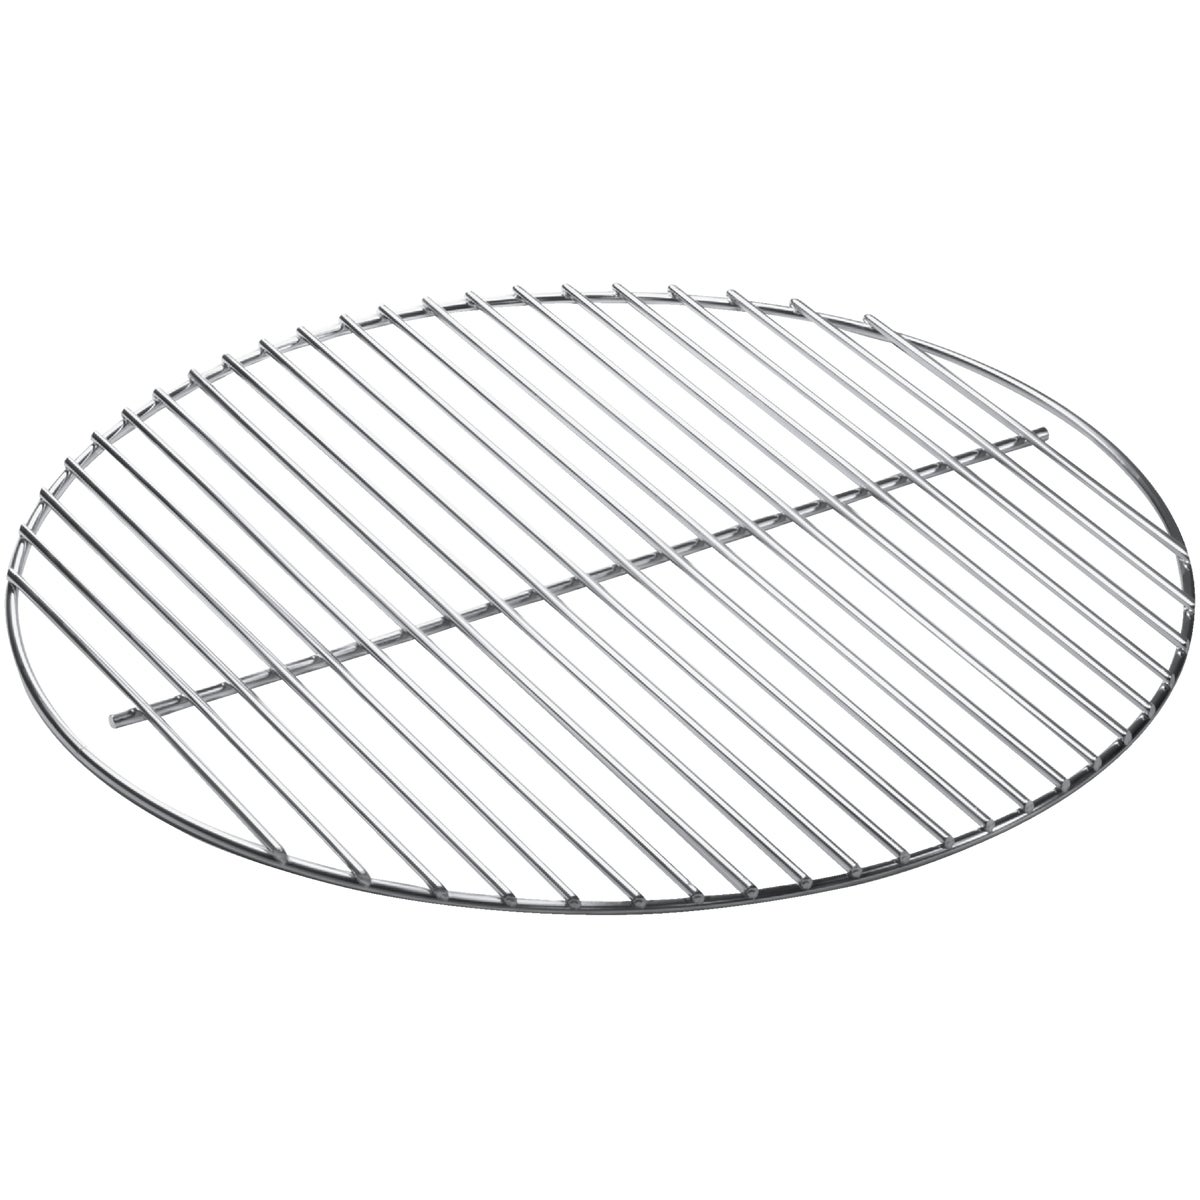 Item 805564, Charcoal grill replacement cooking grate.